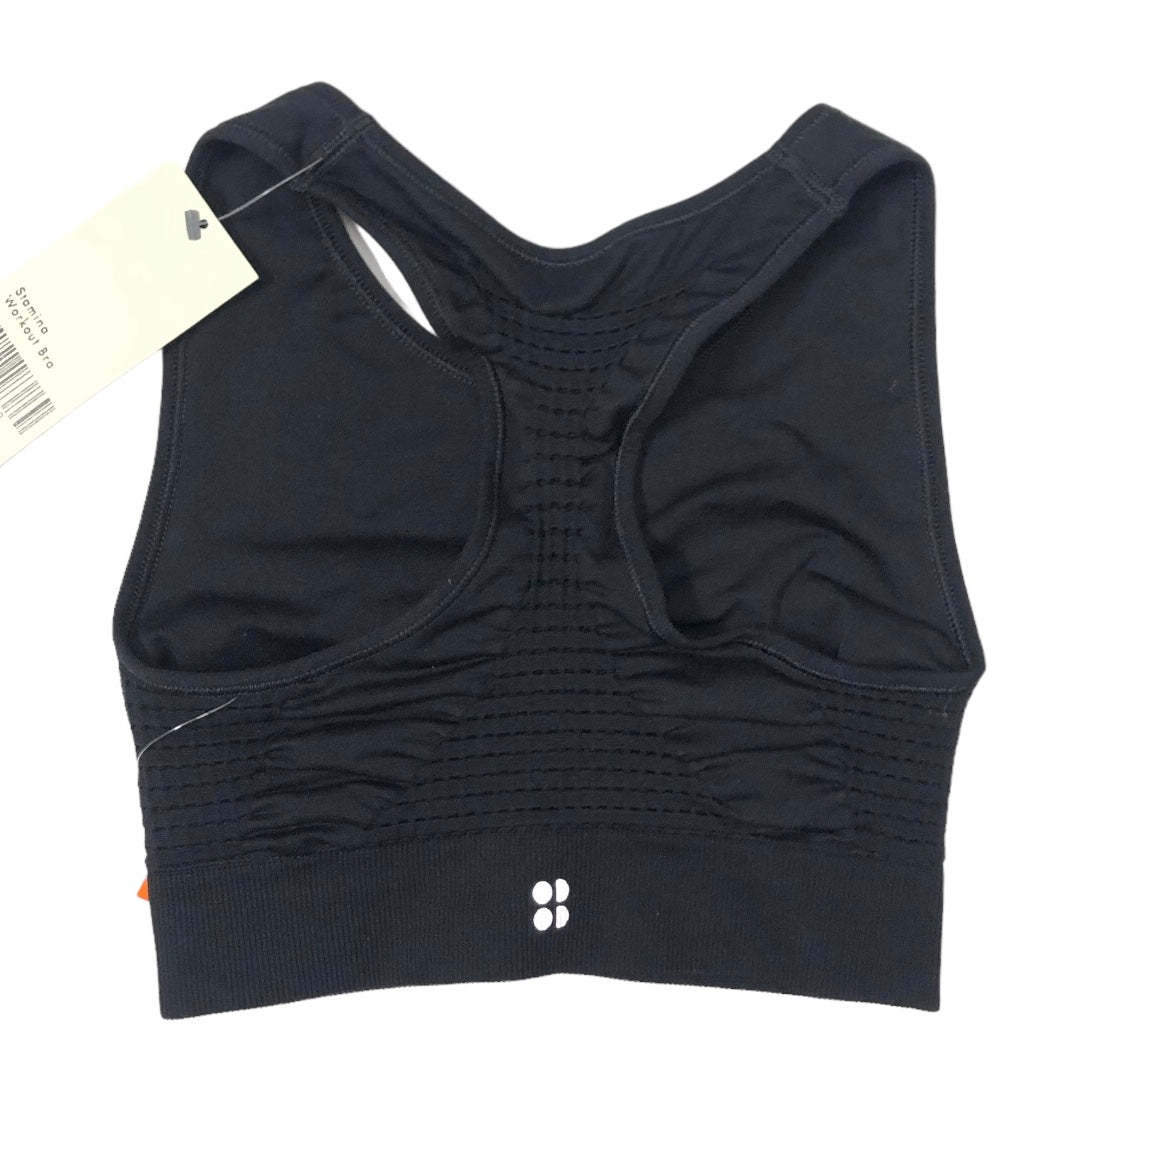 Athletic Tank Top By Sweaty Betty  Size: S